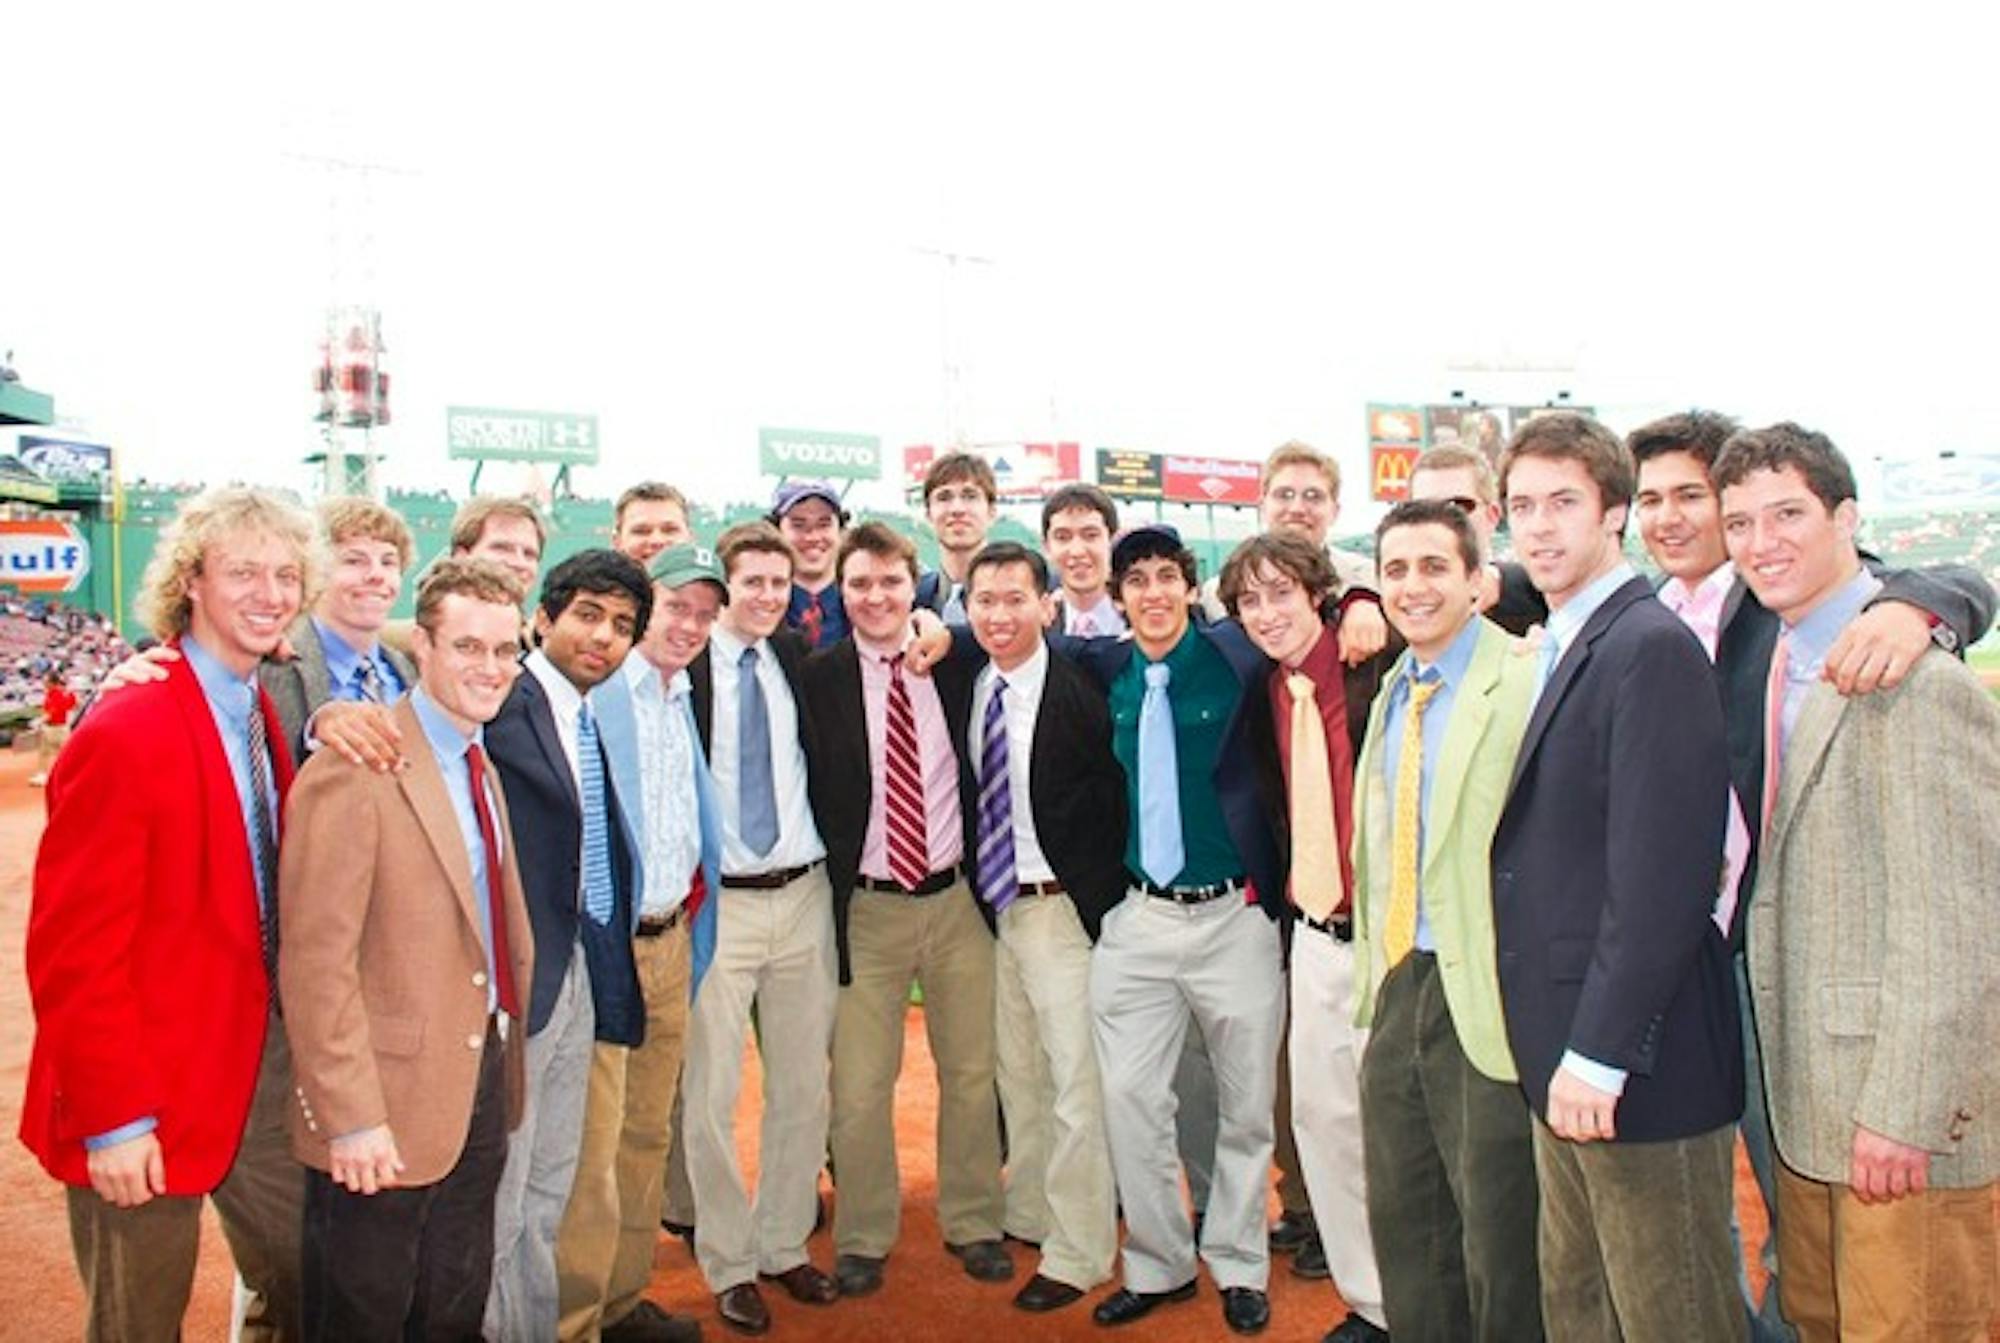 Cords alumni joined current members of the a capella group to sing the nationl anthem at Fenway Park.